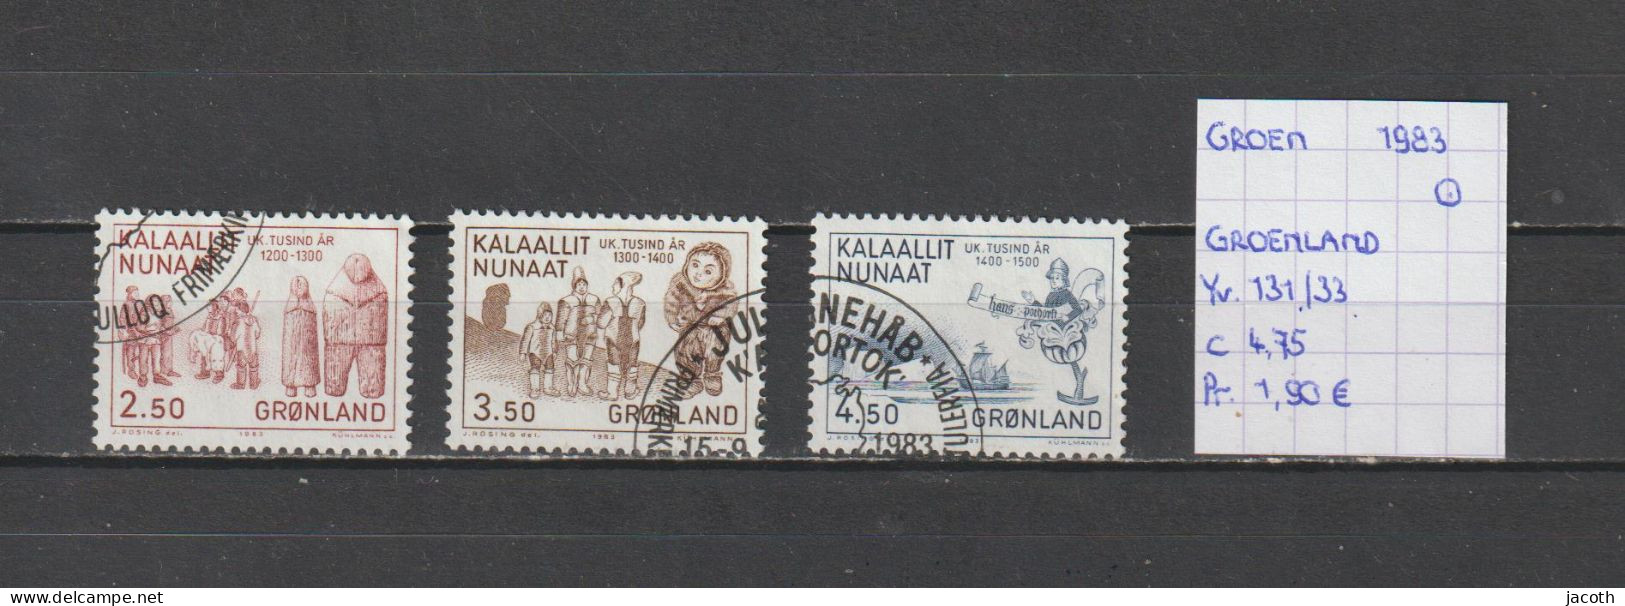 (TJ) Groenland 1983 - YT 131/33 (gest./obl./used) - Used Stamps